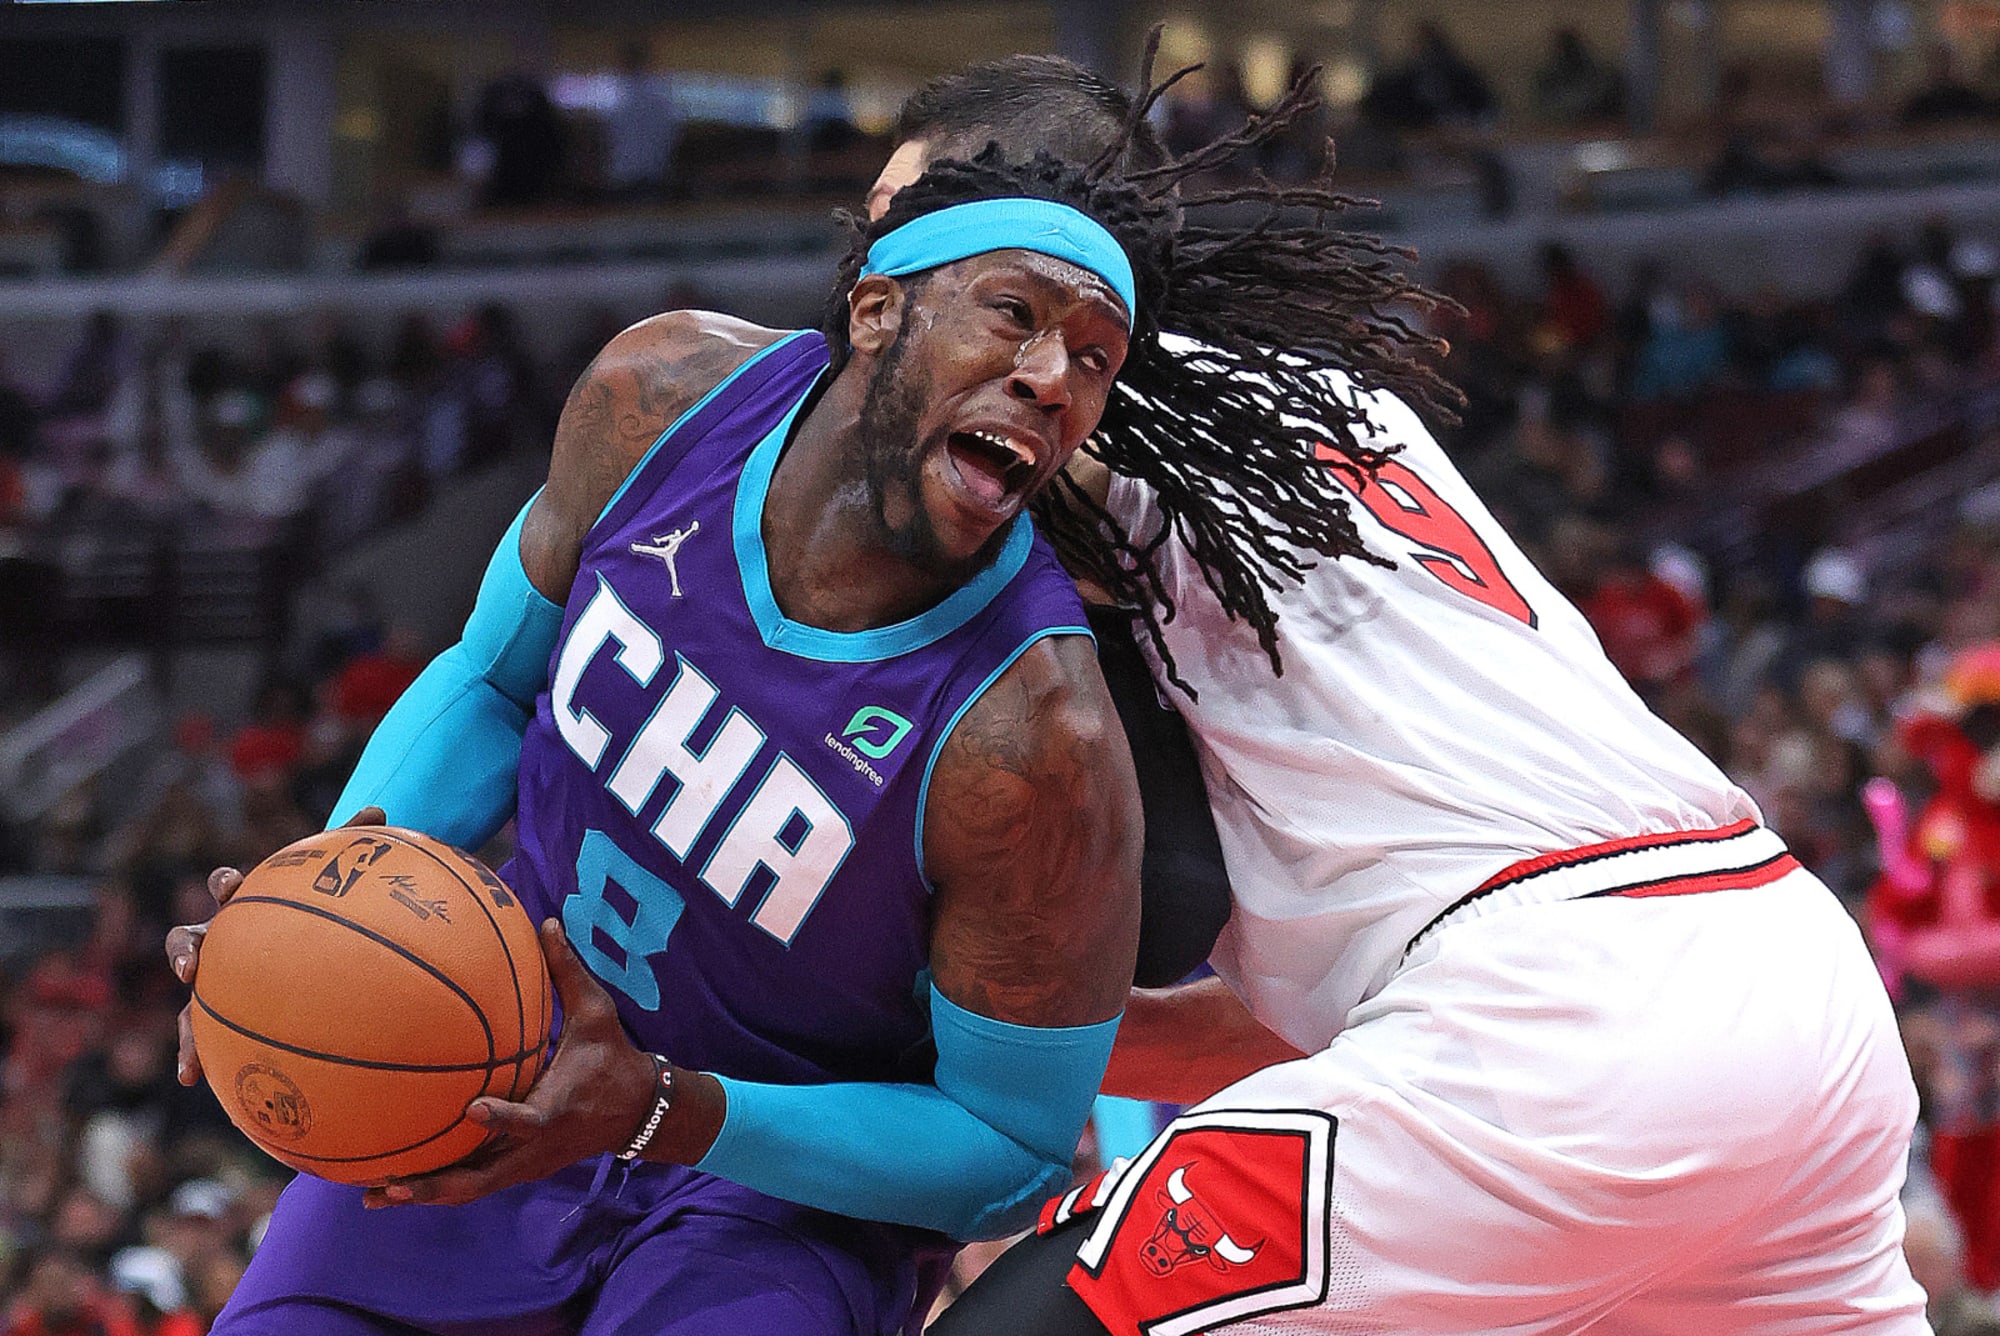 Montrezl Harrell to 76ers' Joel Embiid After Altercation: 'Stand